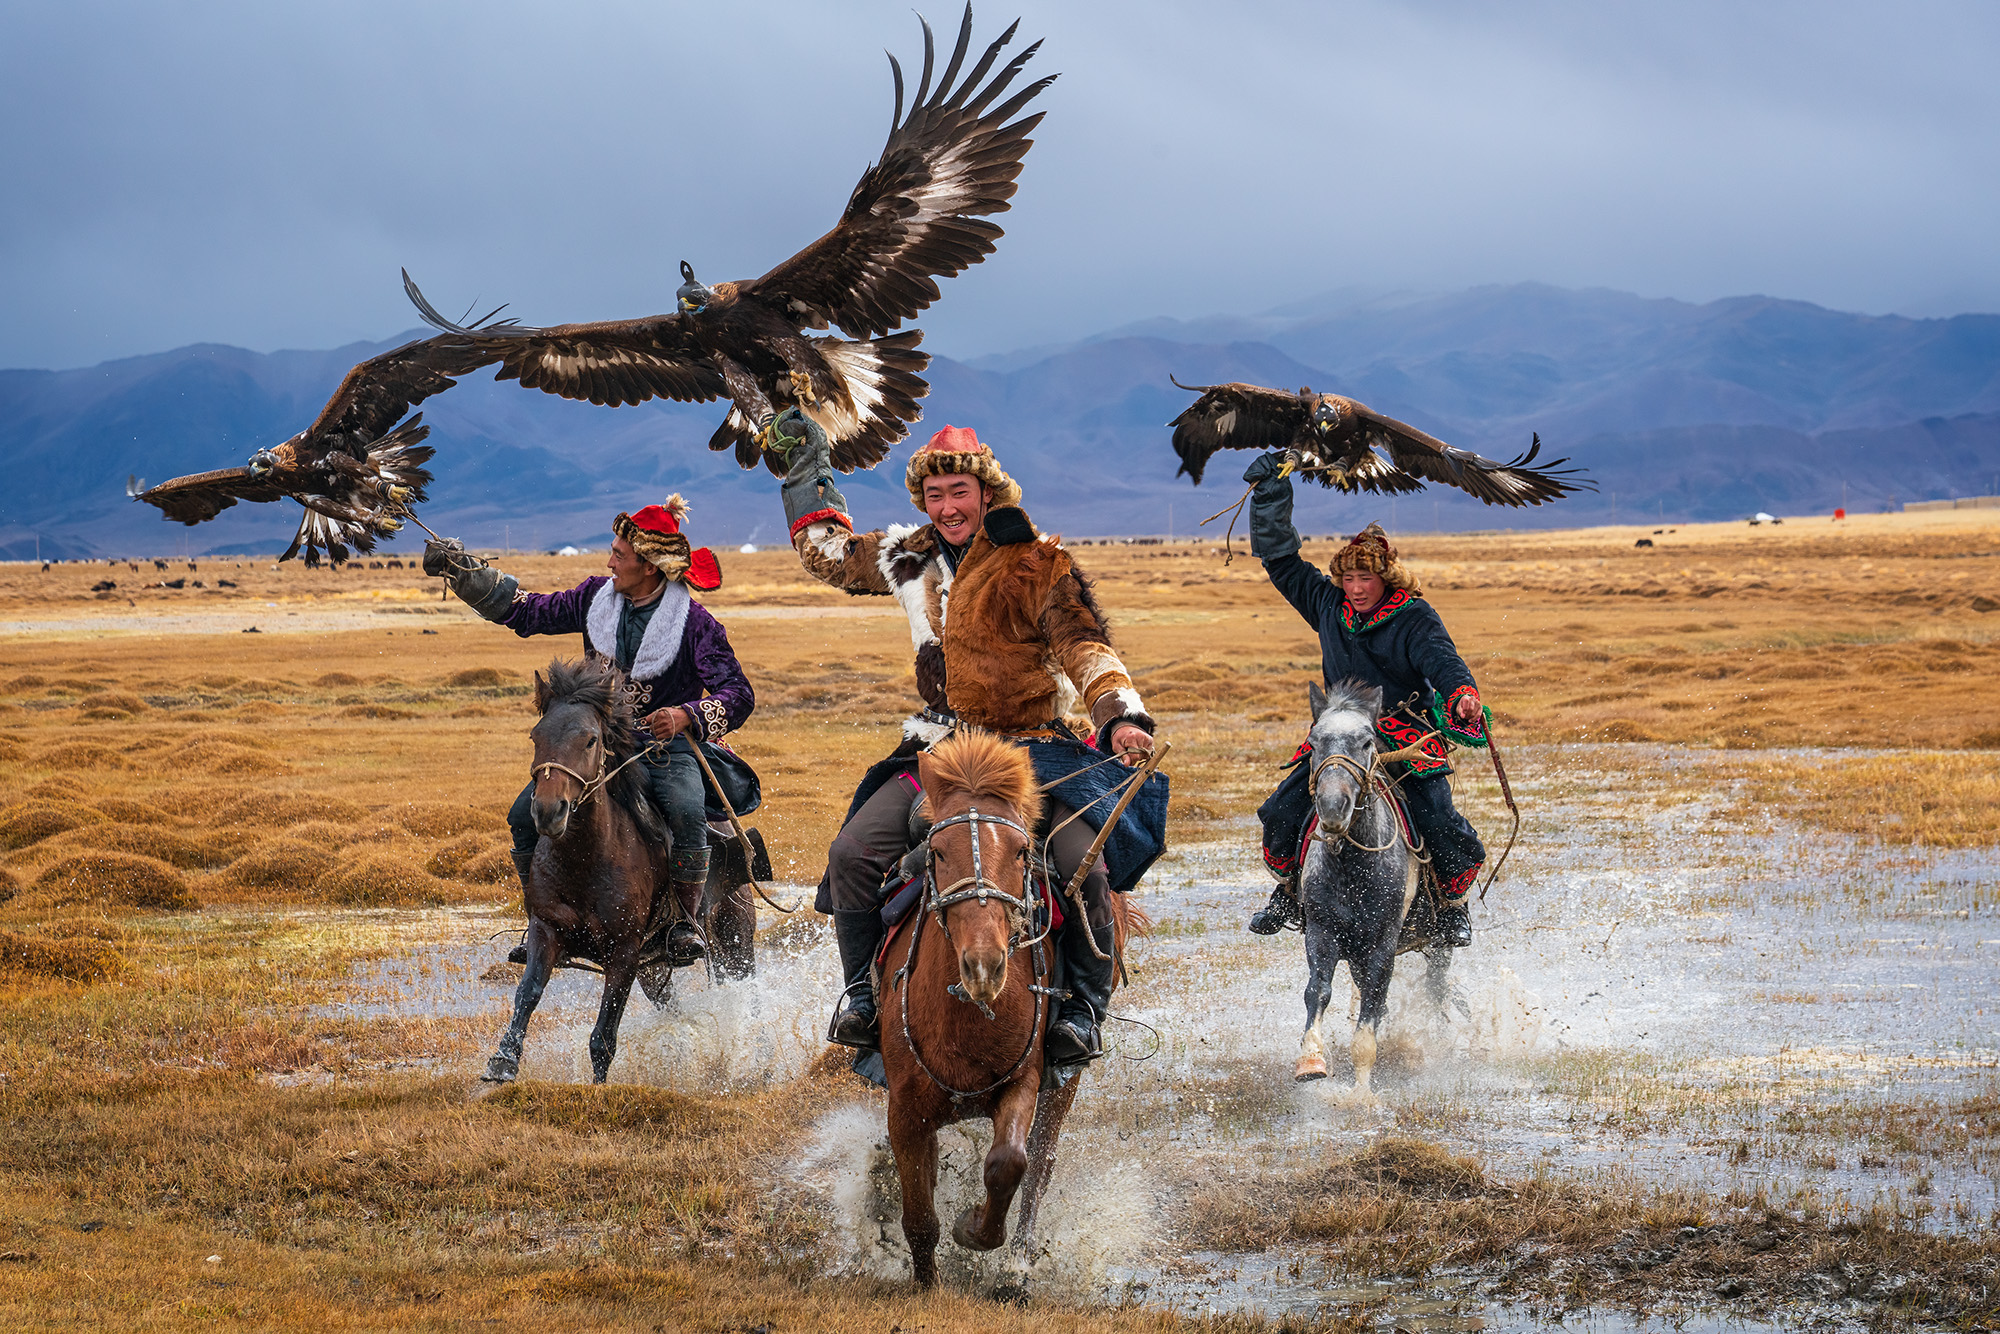 Collaborating with a group of Mongolian eagle hunters and their magnificent golden eagles in western Mongolia was an unforgettable...